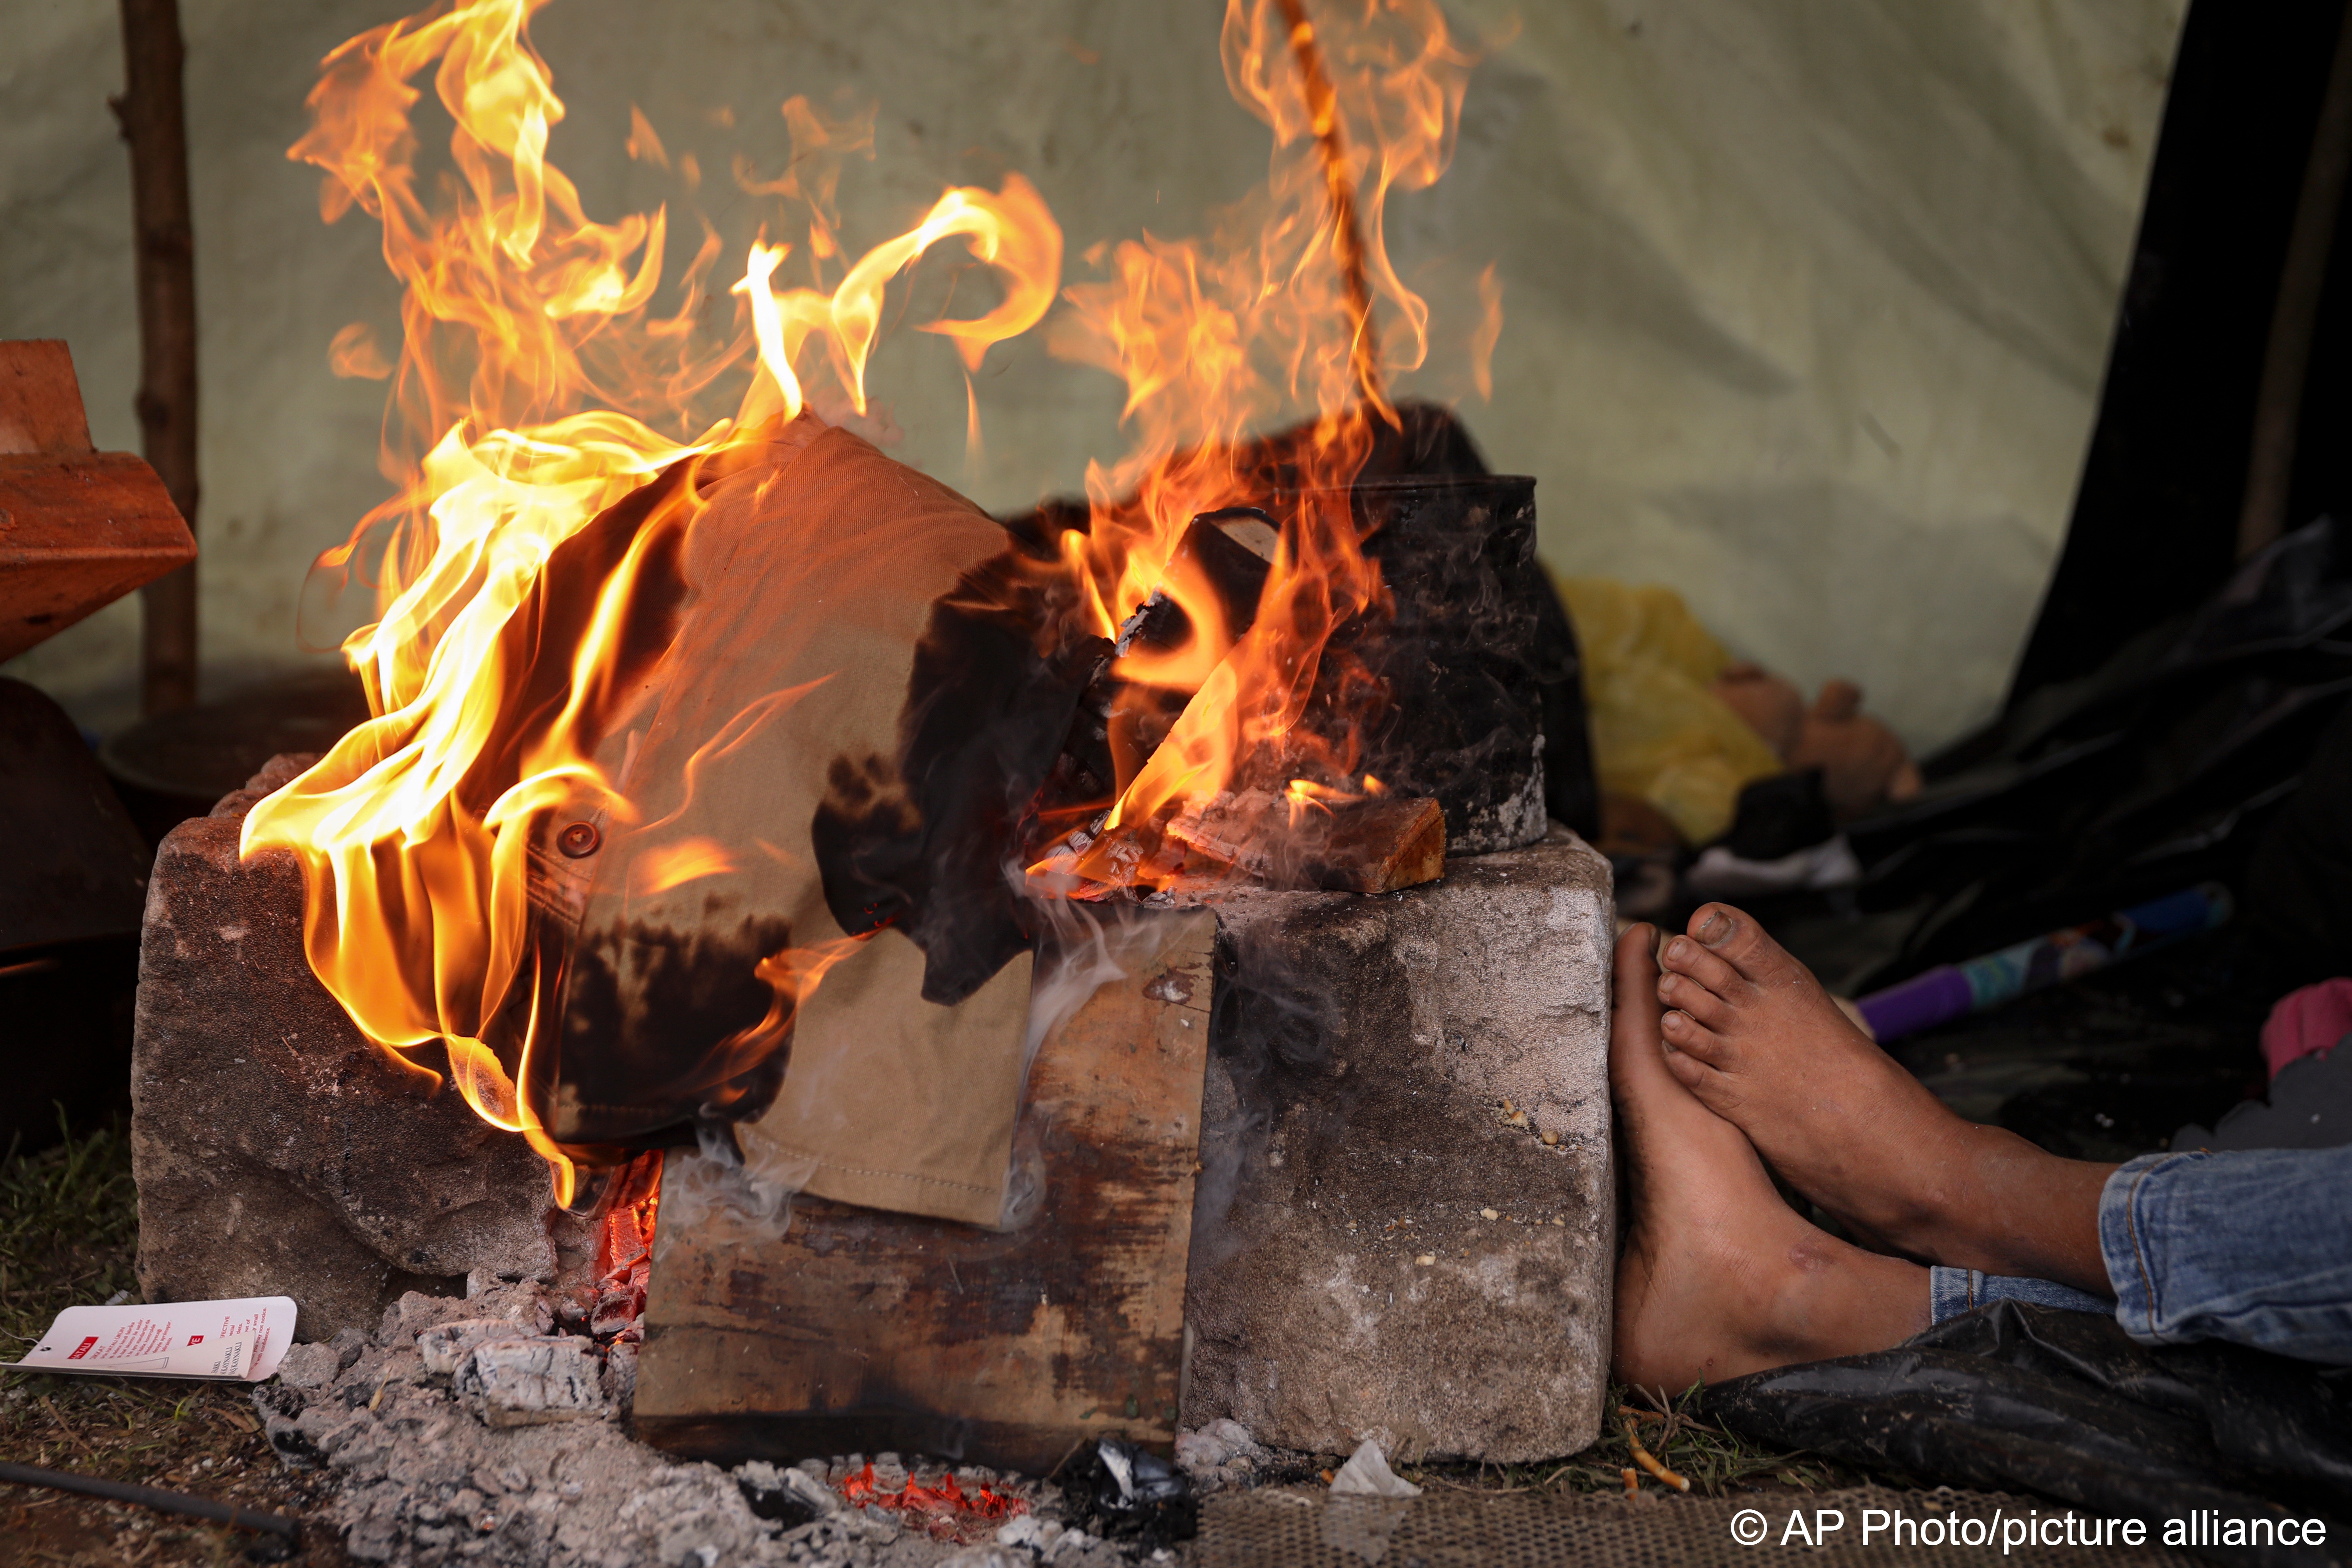 A migrant boy warms his feet by a fire at a makeshift camp housing migrants mostly from Afghanistan, in Velika Kladusa, Bosnia, 12 October 2021 (photo: AP Photo)